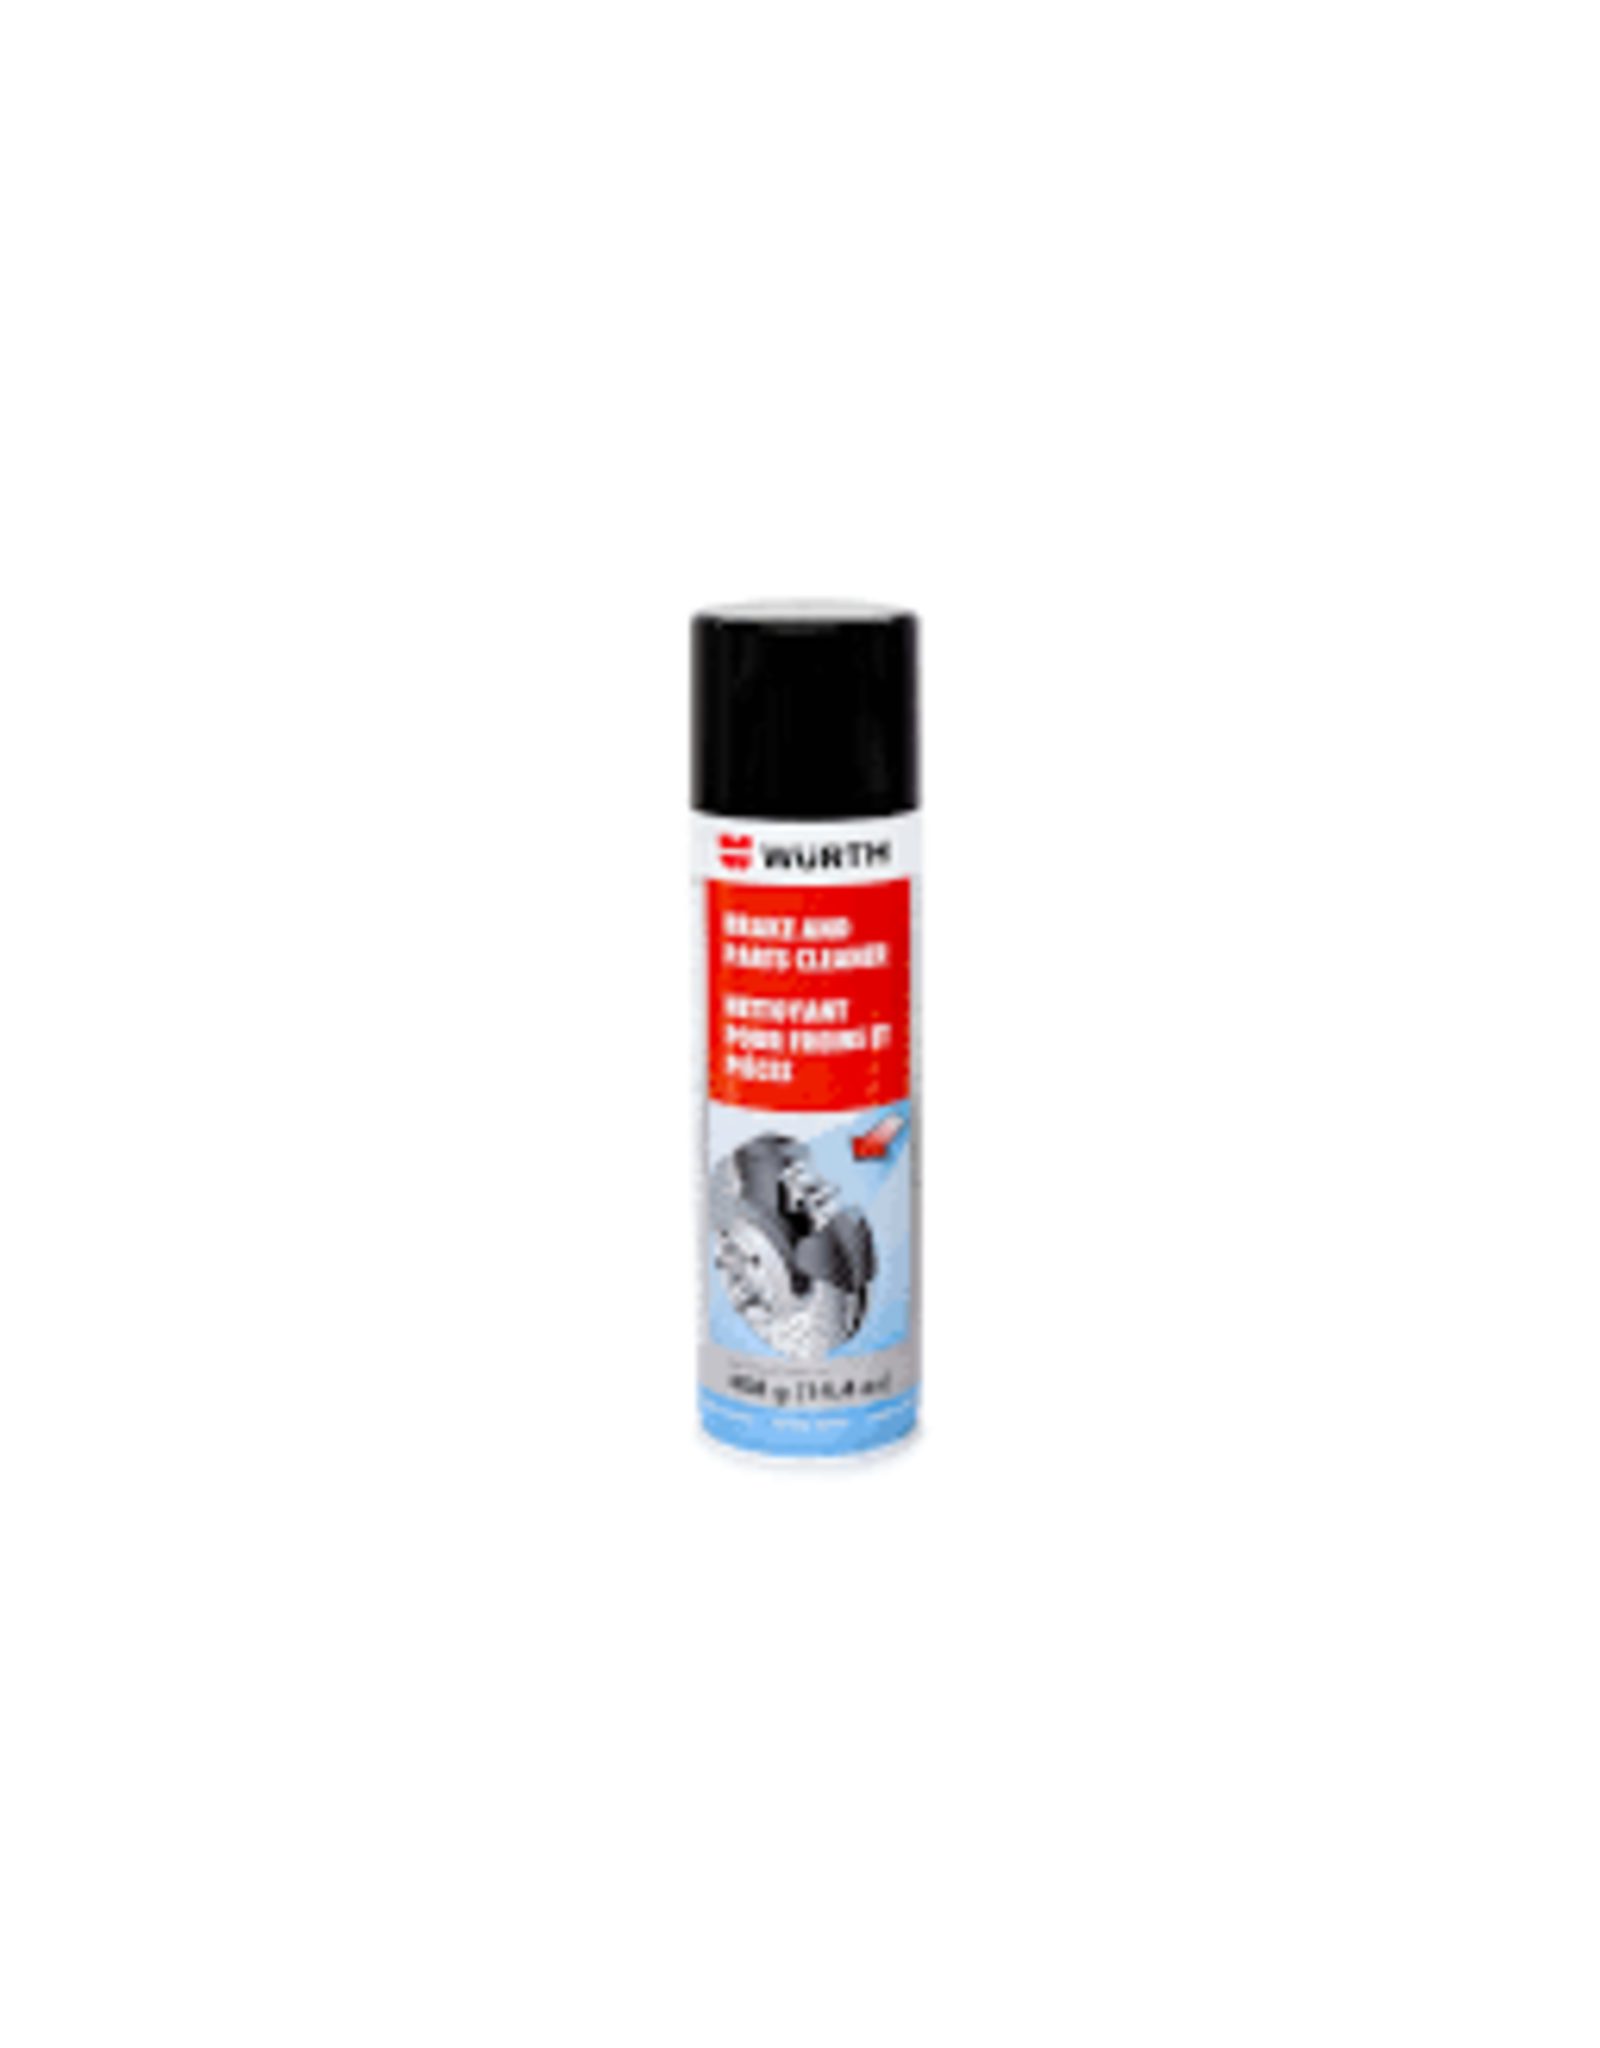 Wurth Brake and Parts Cleaner